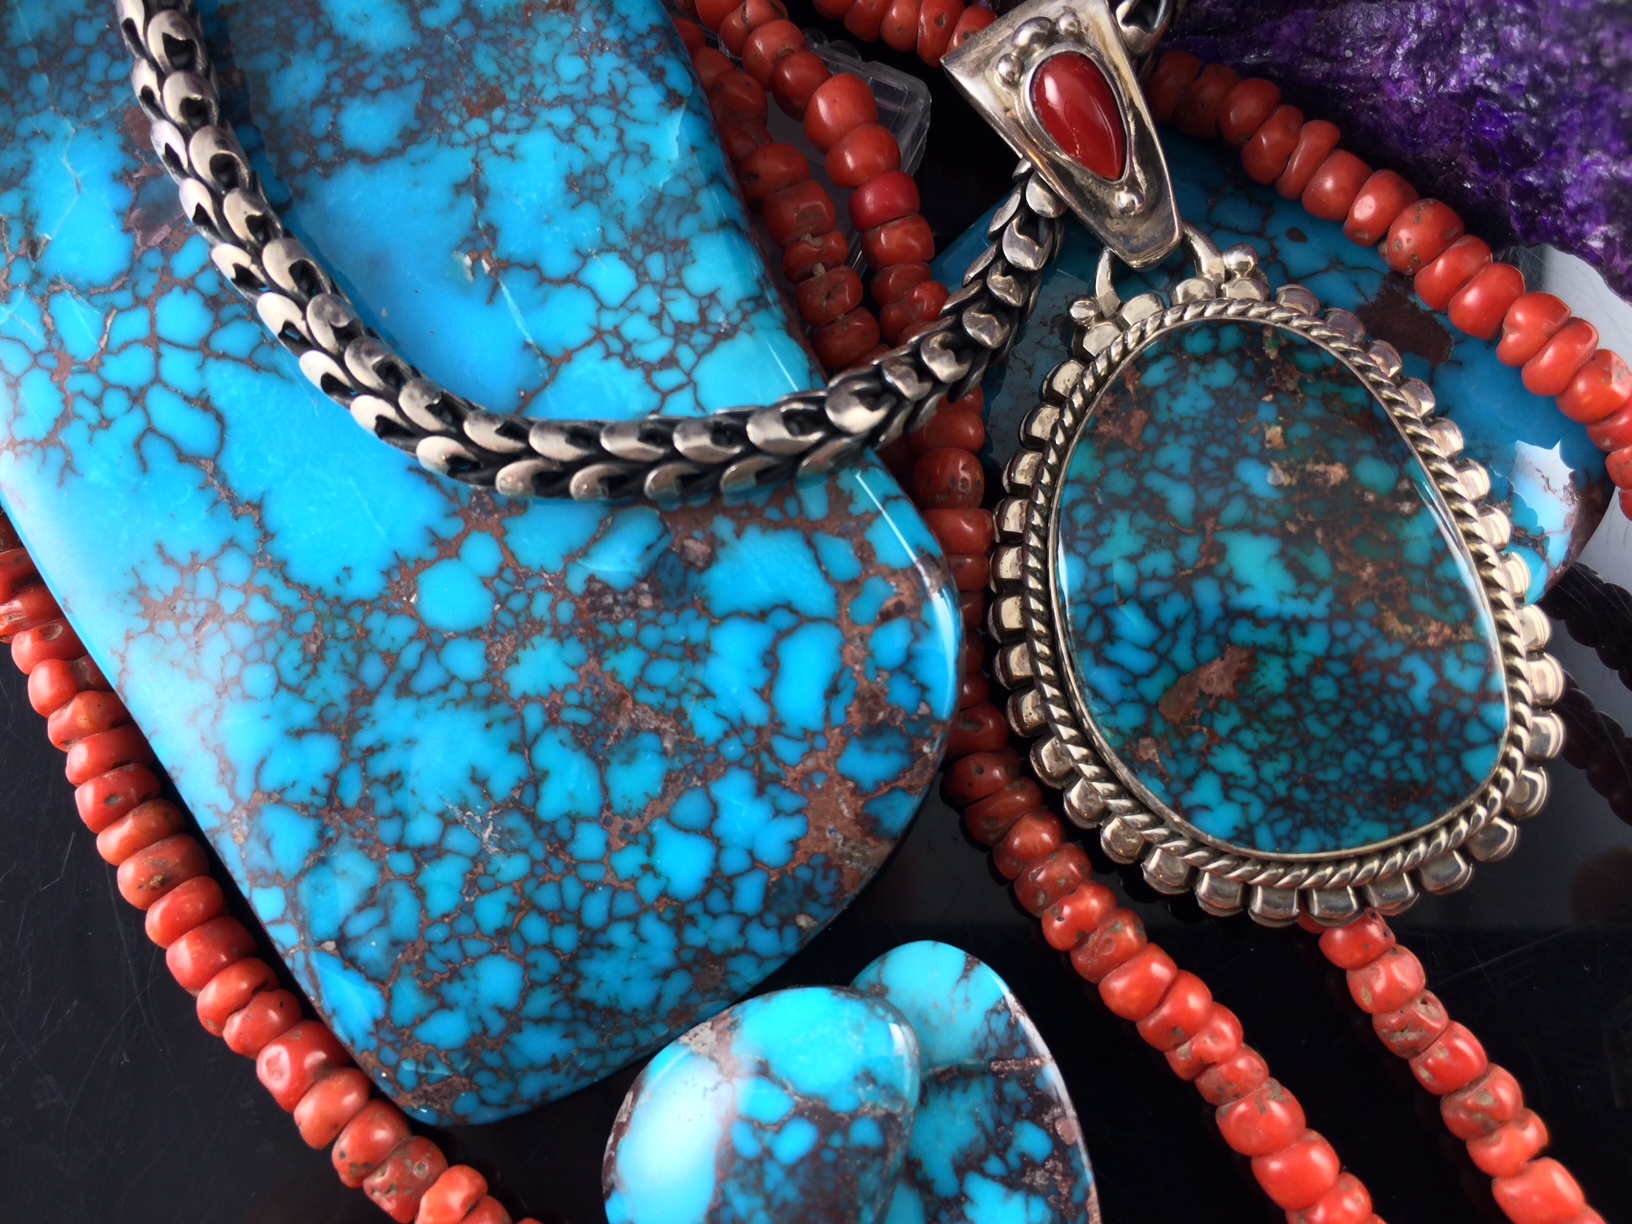 Bisbee Turquoise Collection - Durango Silver Company